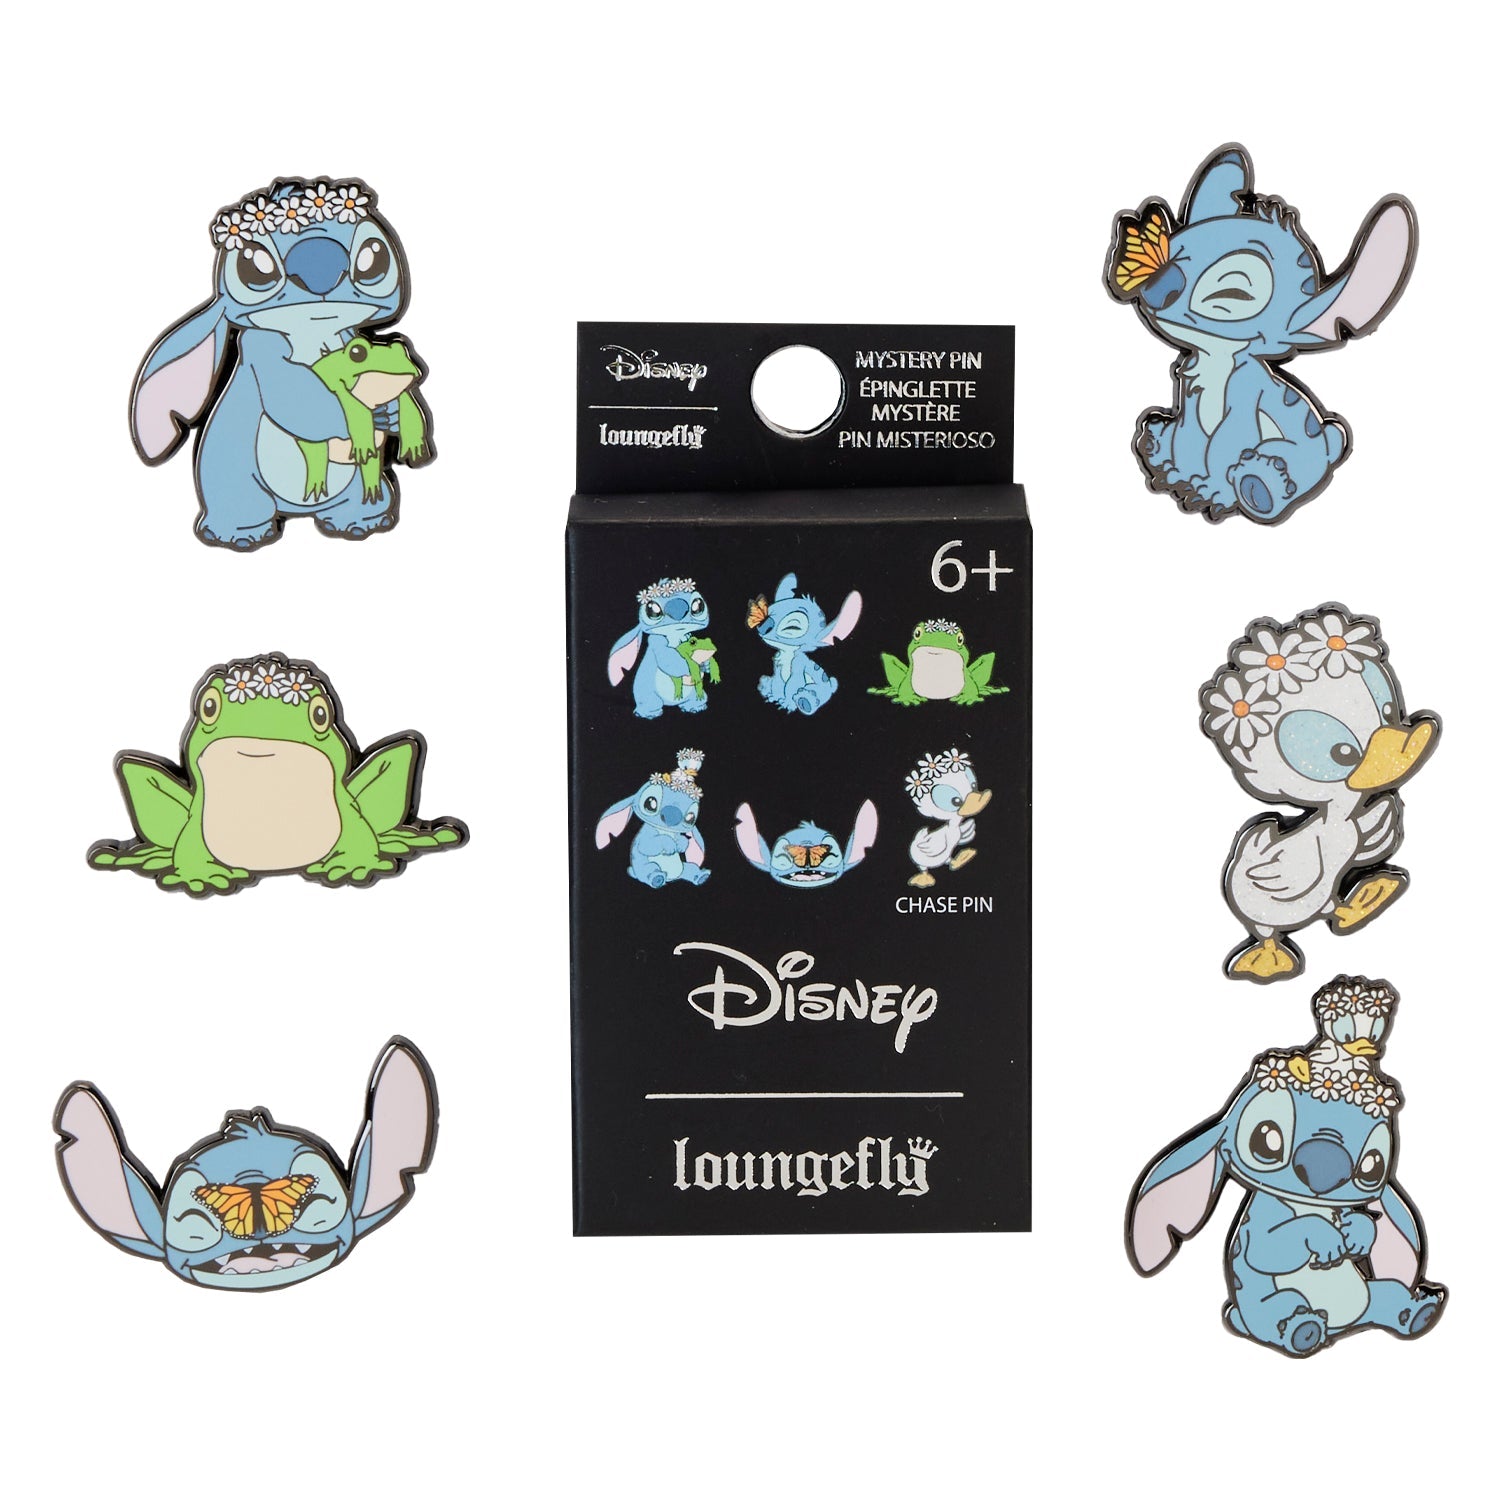 Loungefly x Disney Lilo and Stitch Springtime Mystery Pin Blind Box - GeekCore